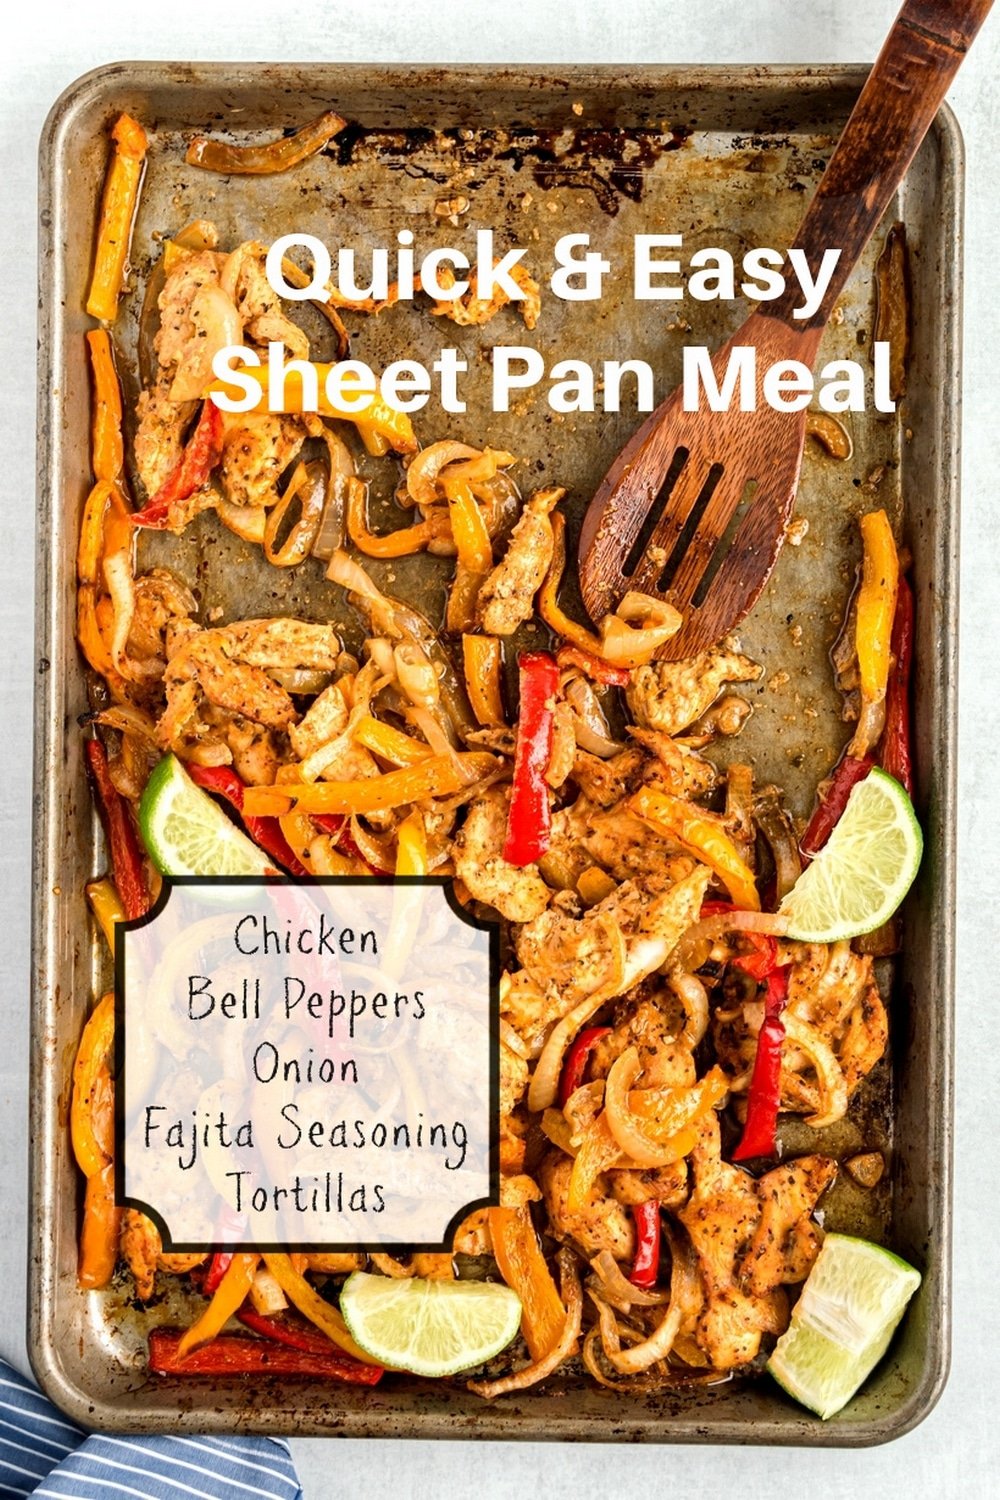 If you're wondering what to make with roasted peppers and onions, these deliciously, healthy sheet pan chicken fajitas are for you. I created this easy recipe with weeknight meals in mind. The perfectly seasoned, tender chicken and crunchy veggies make this tasty meal one you'll revisit often. via @cmpollak1